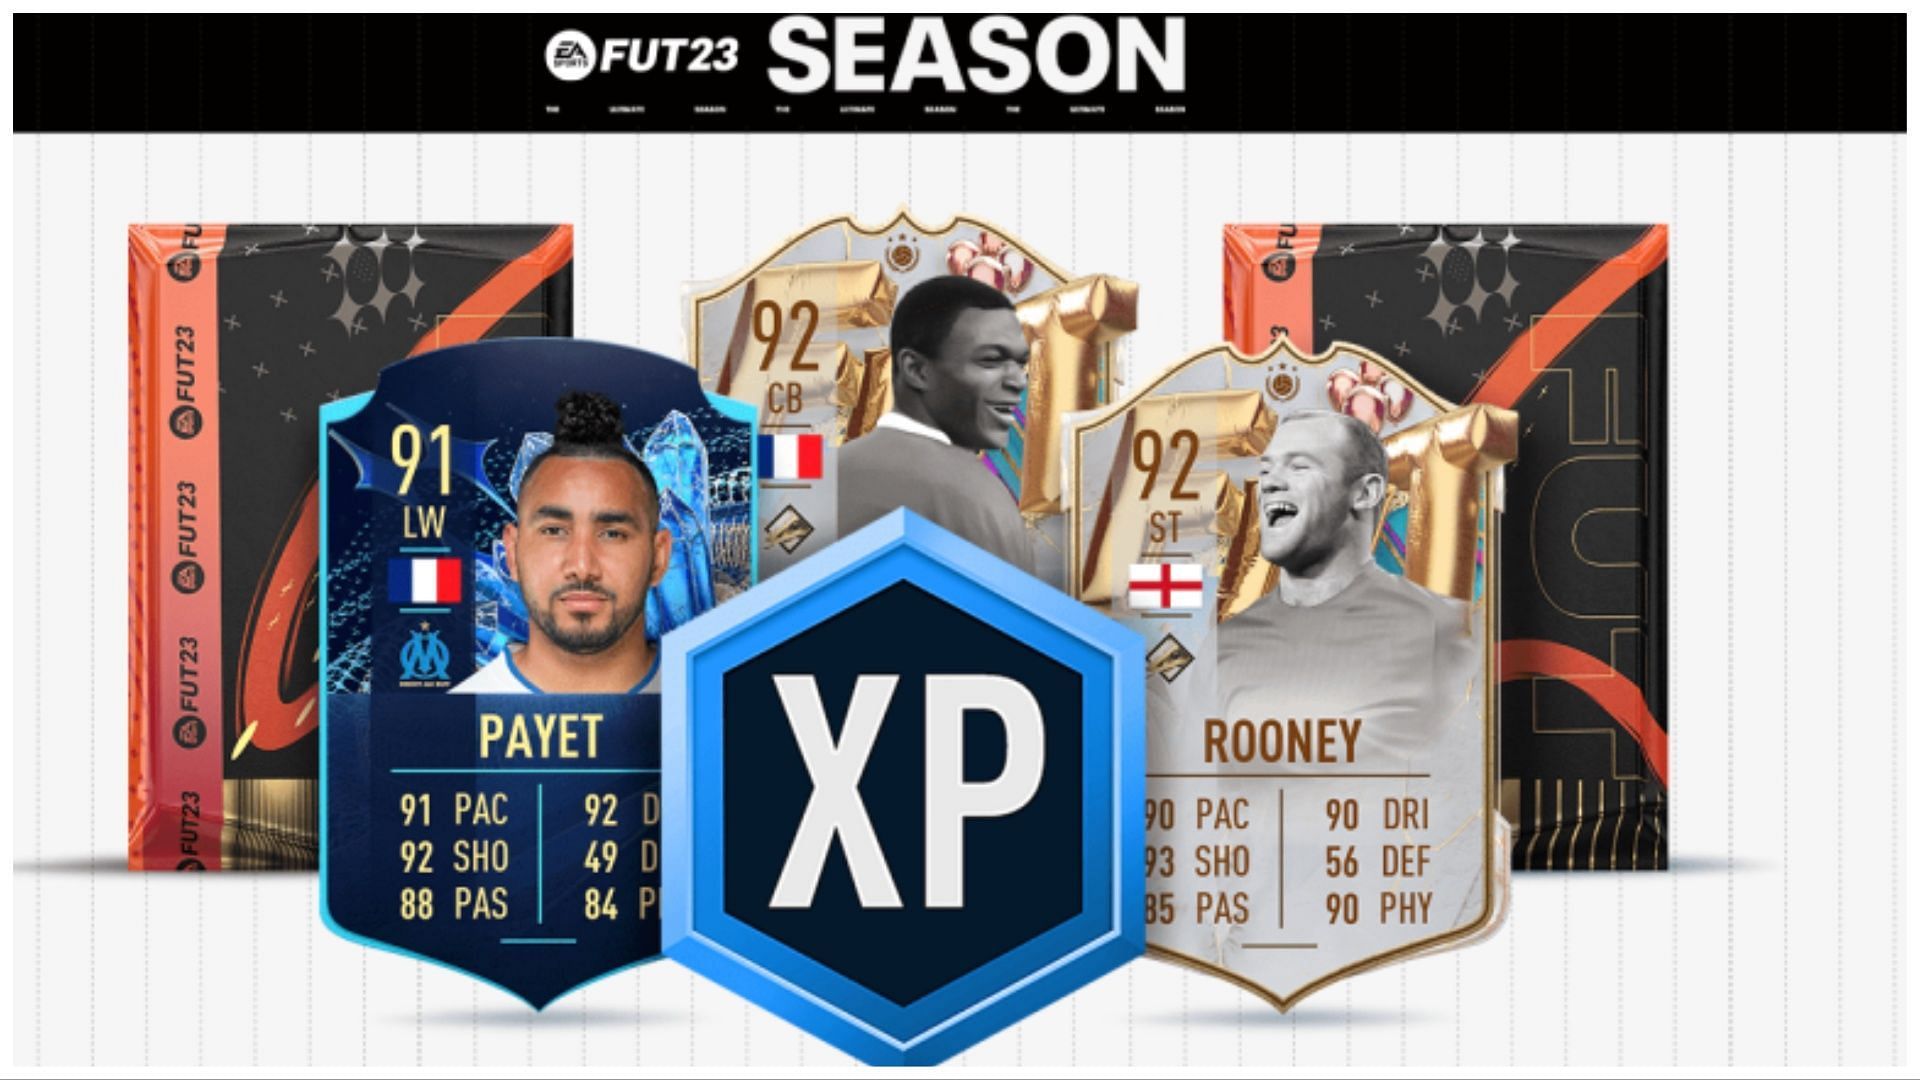 TOTS Season Swaps is now live in FIFA 23 (Images via EA Sports)